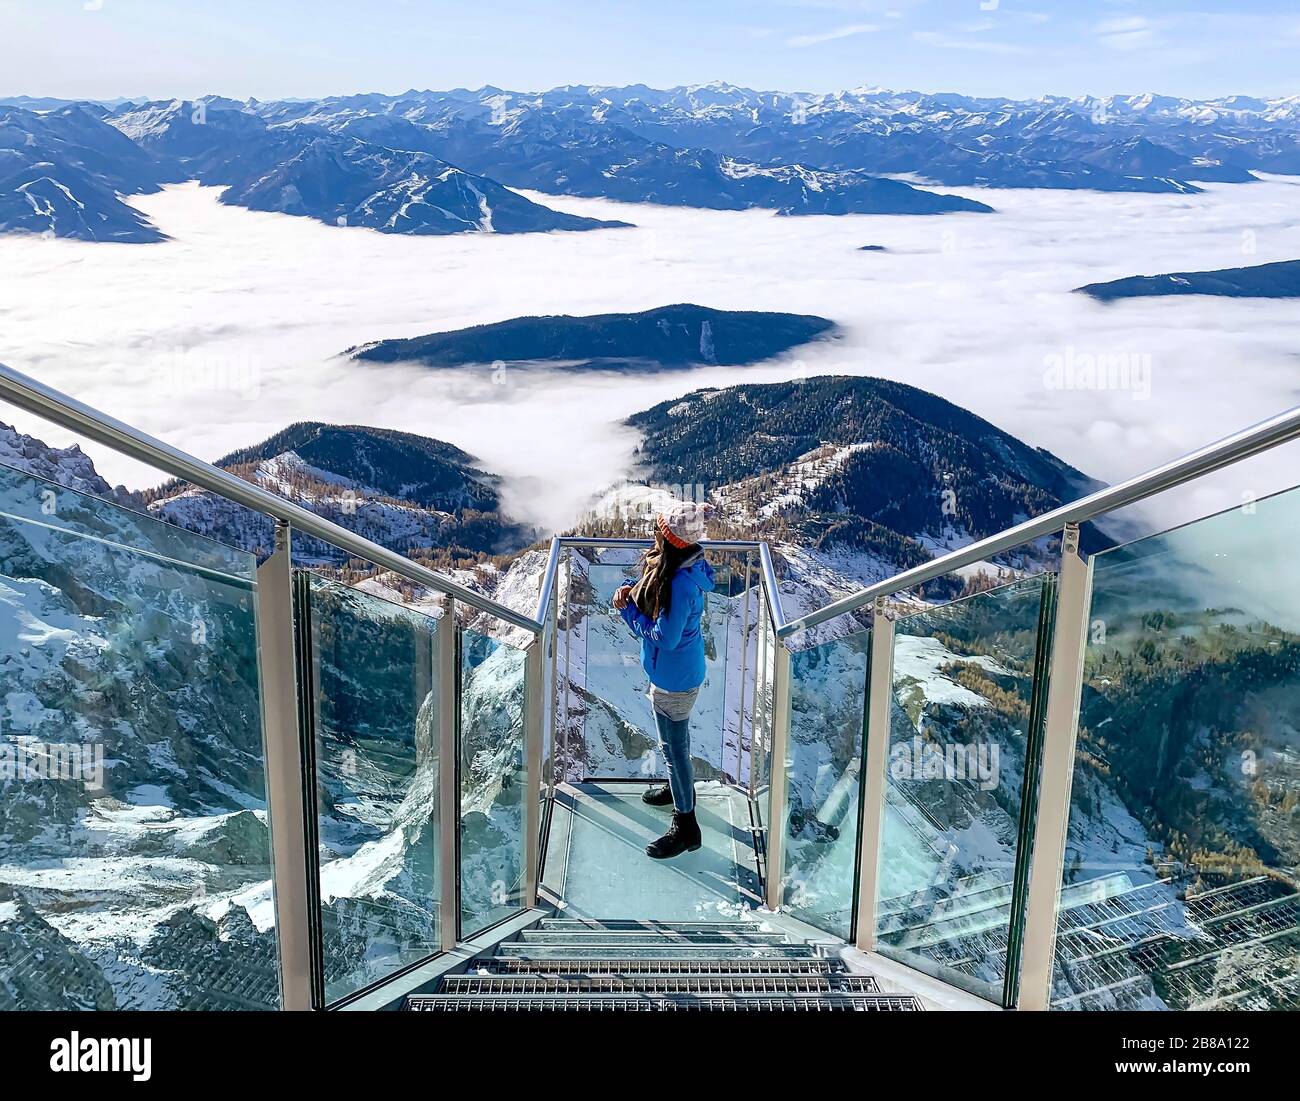 Female person standing on sky walk glass at Dachstein, enjoying view of snowy mountains in Austria on winter vacation Stock Photo